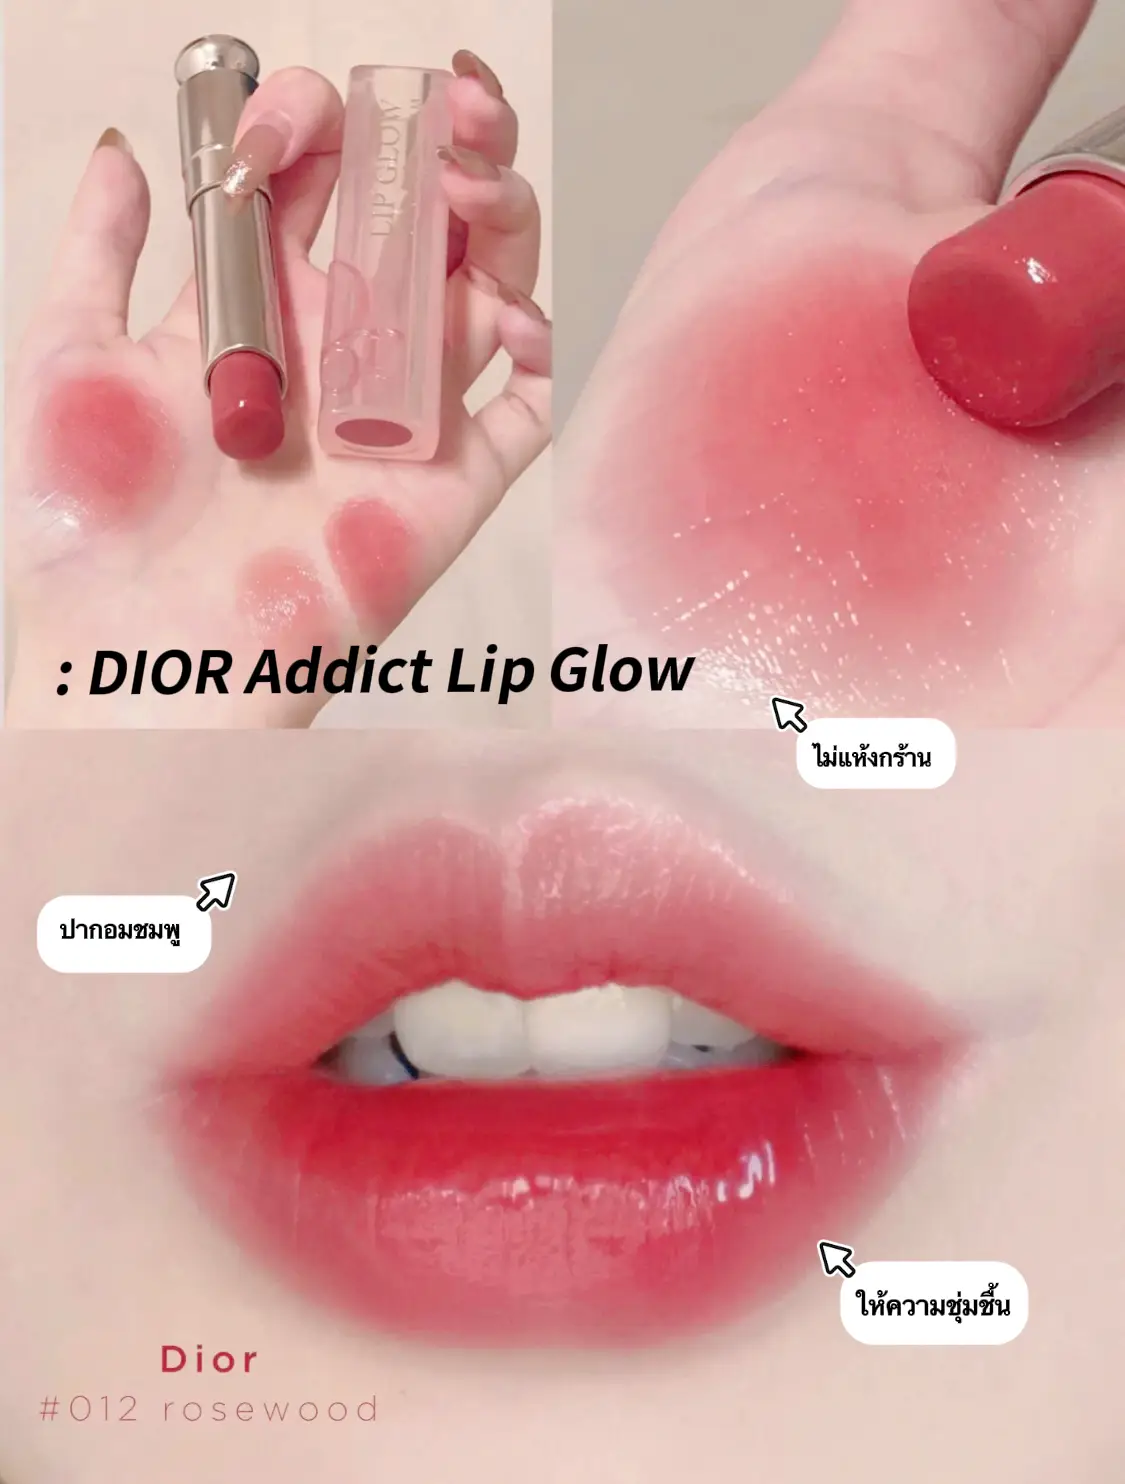 DIOR plump.💄✨ Gallery lips Three Fill Lemon8 look make posted Two by your a to Addict Lip Nine Glow | | label 💋Request drug